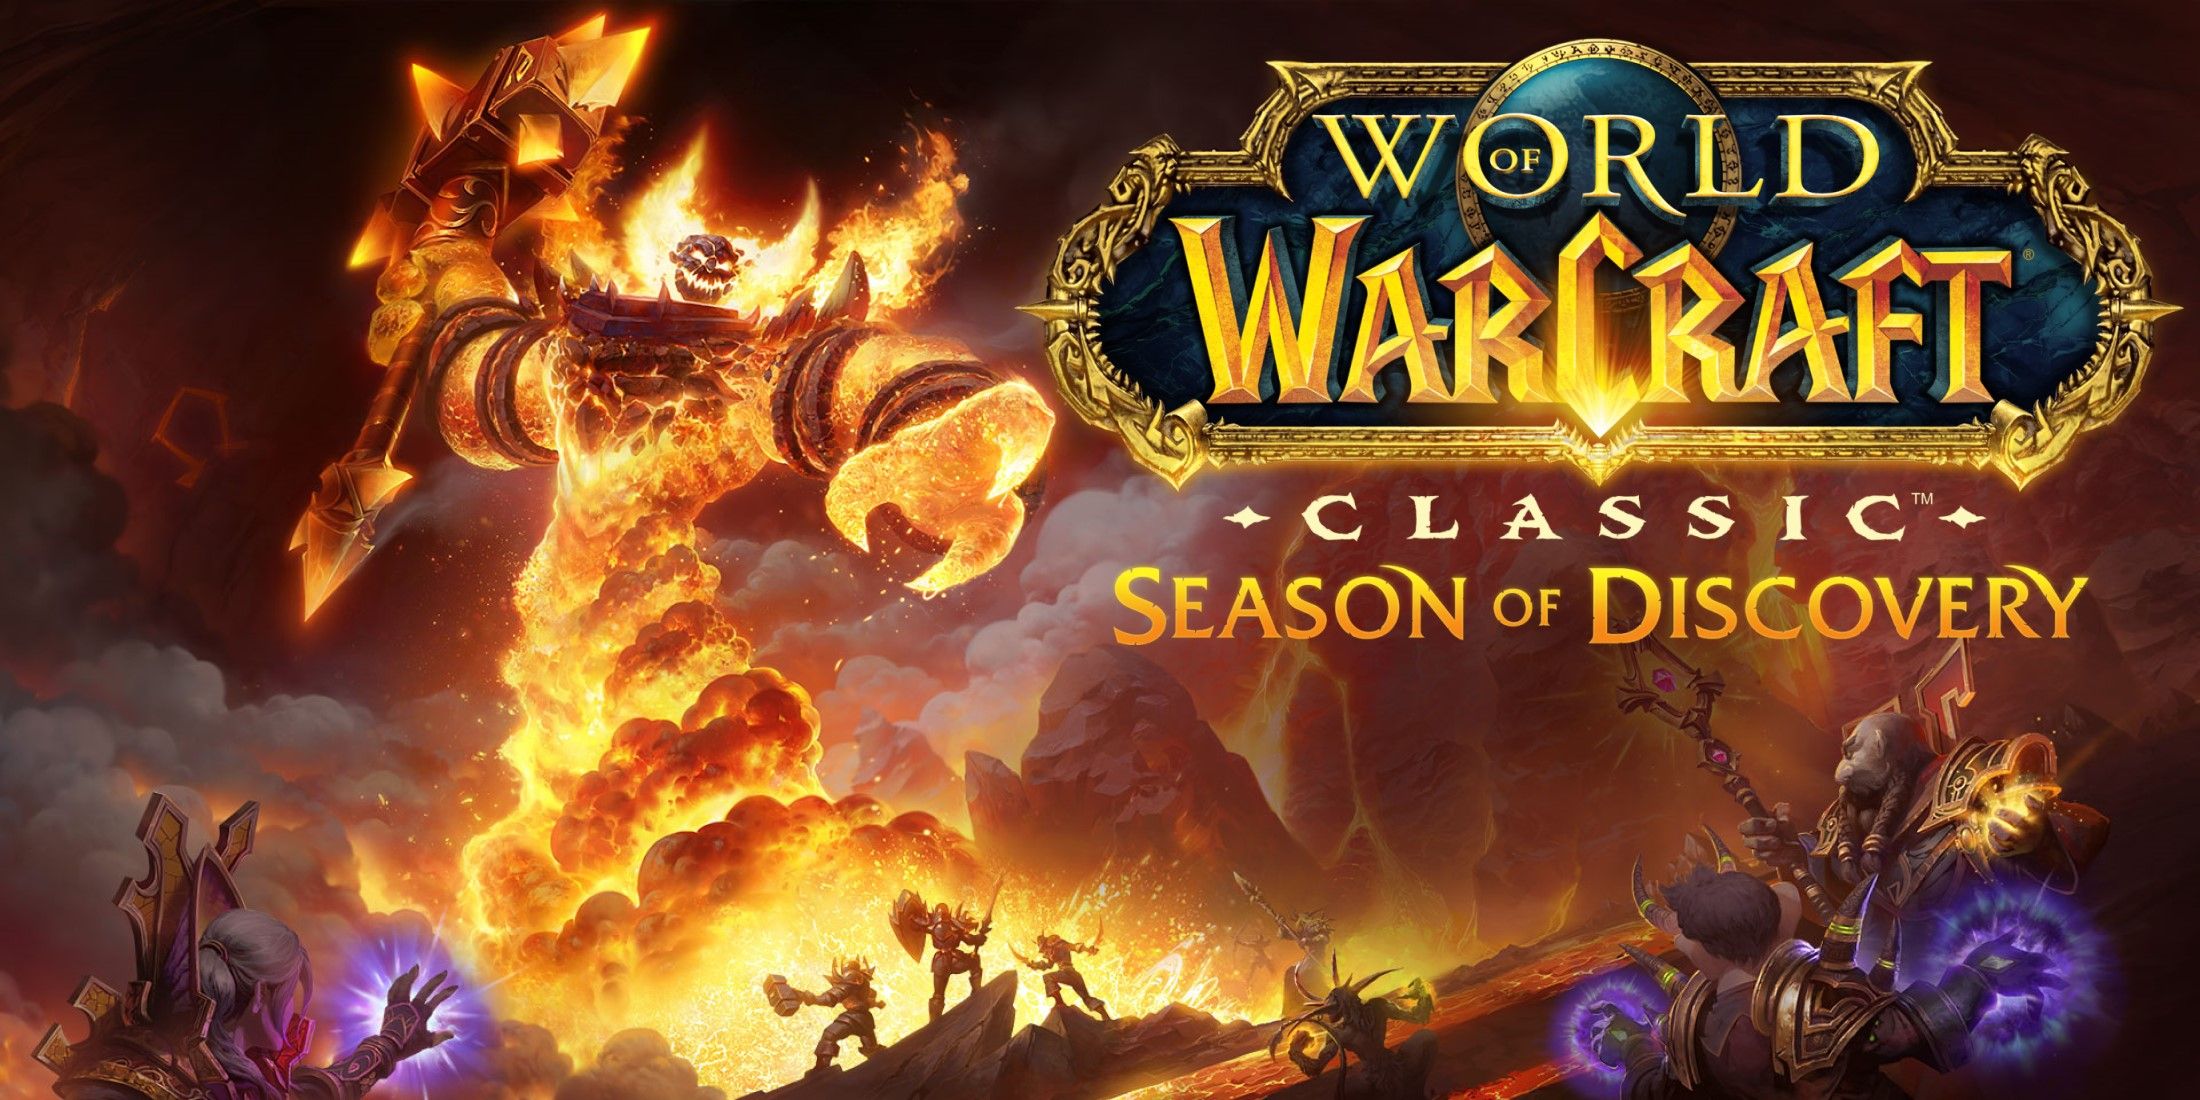 ragnaros from wow classic with the season of discovery logo